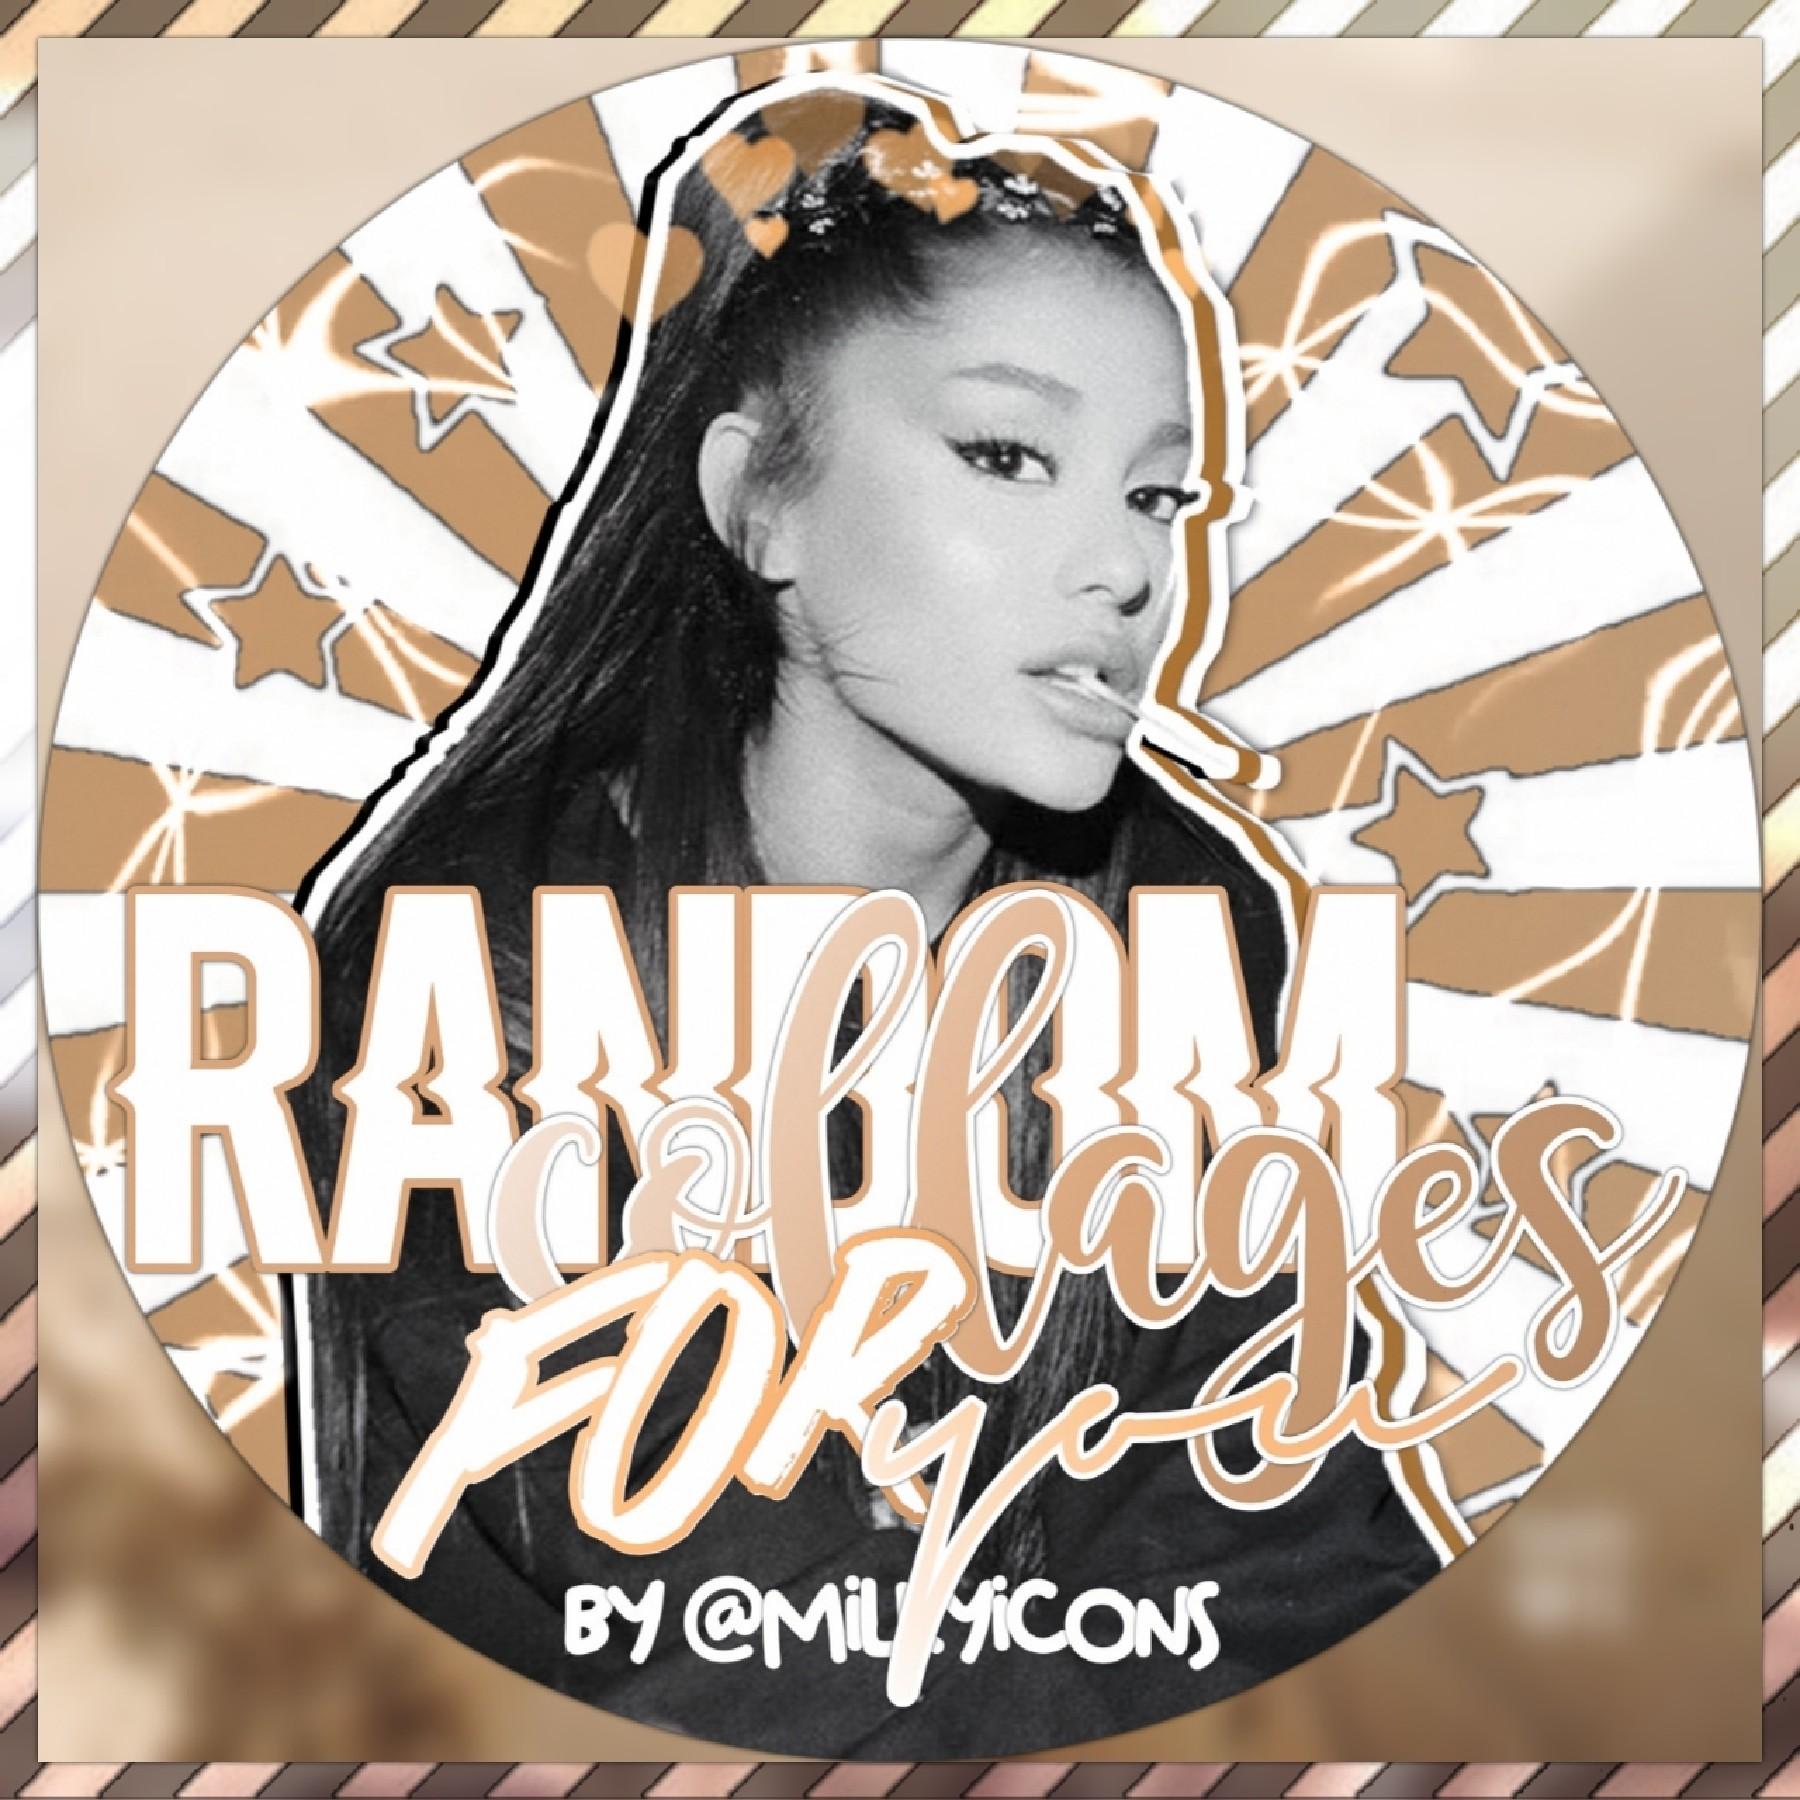 icon for: @ranfomcollagesforyou
style: simple
color: tan & white🐌
hope you like it!! pls give credits if used💗😊